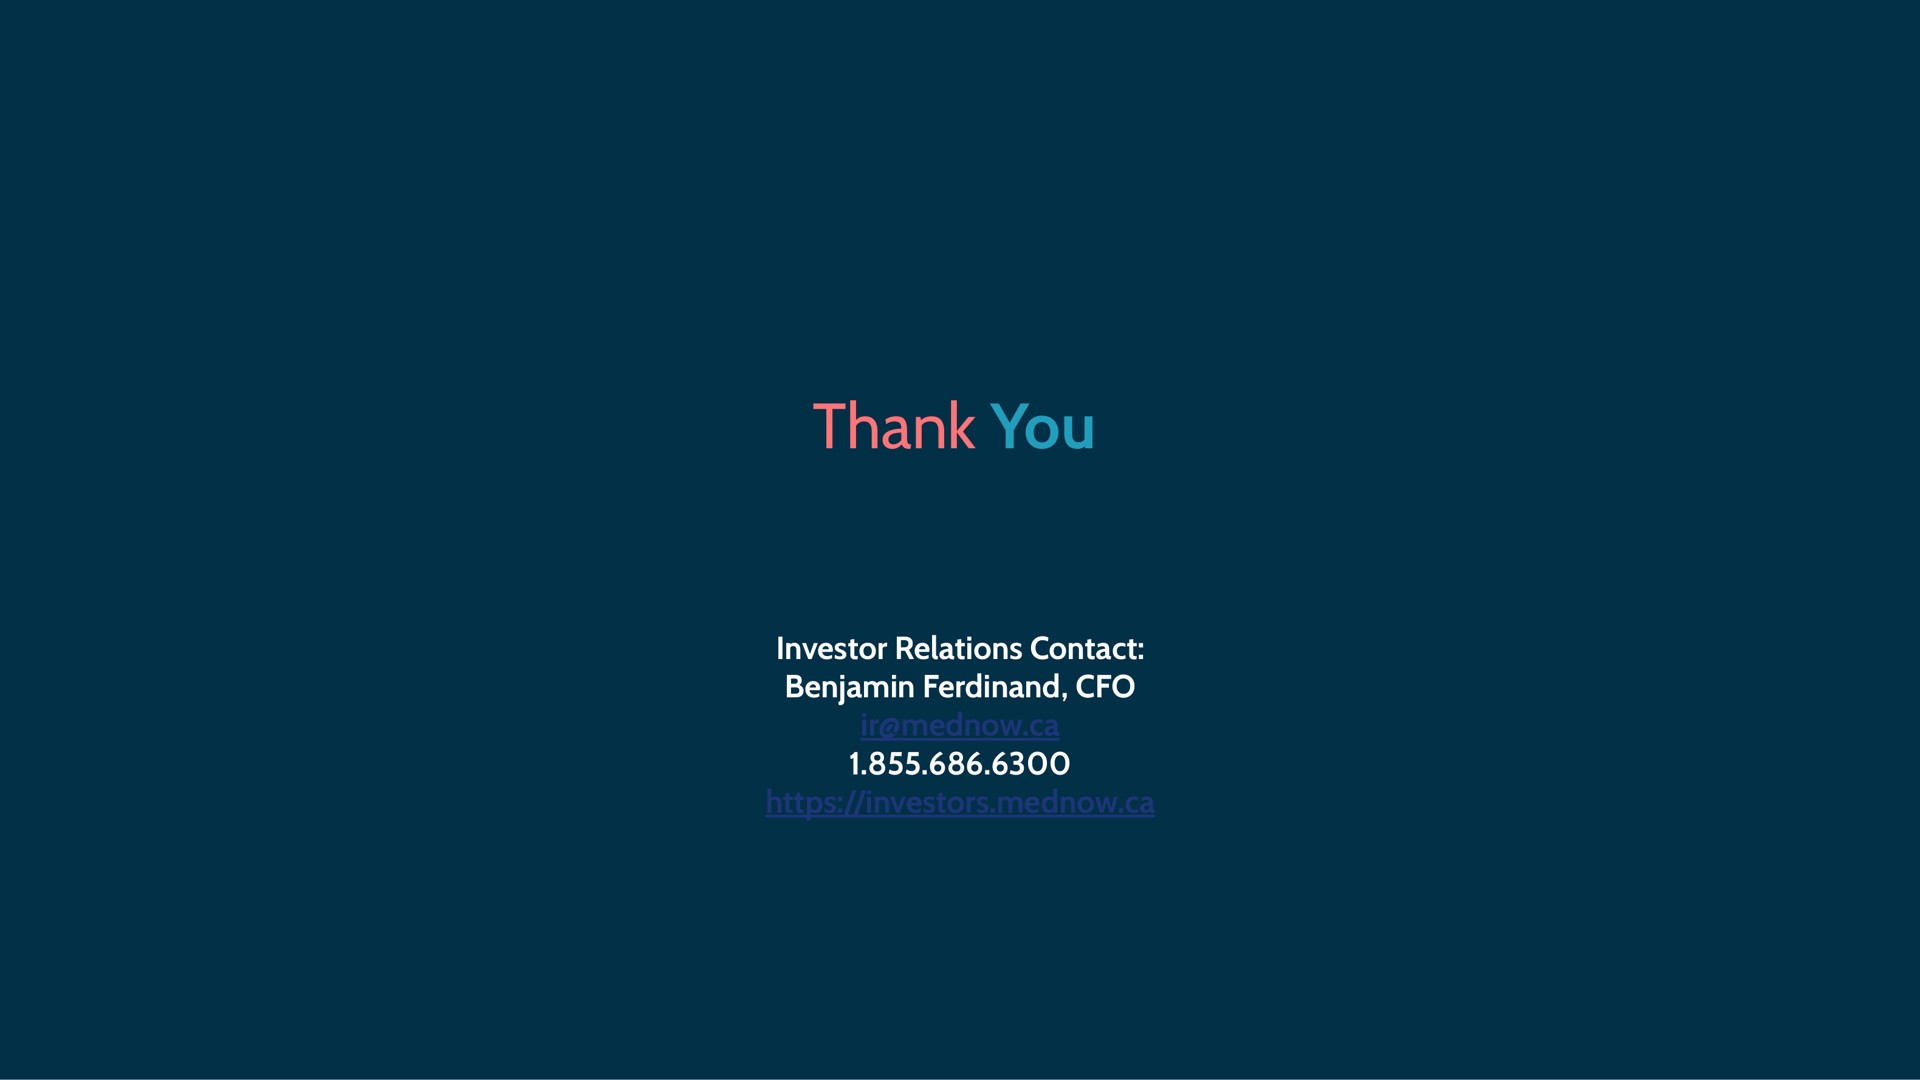 thank you investor relations contact benjamin | Mednow